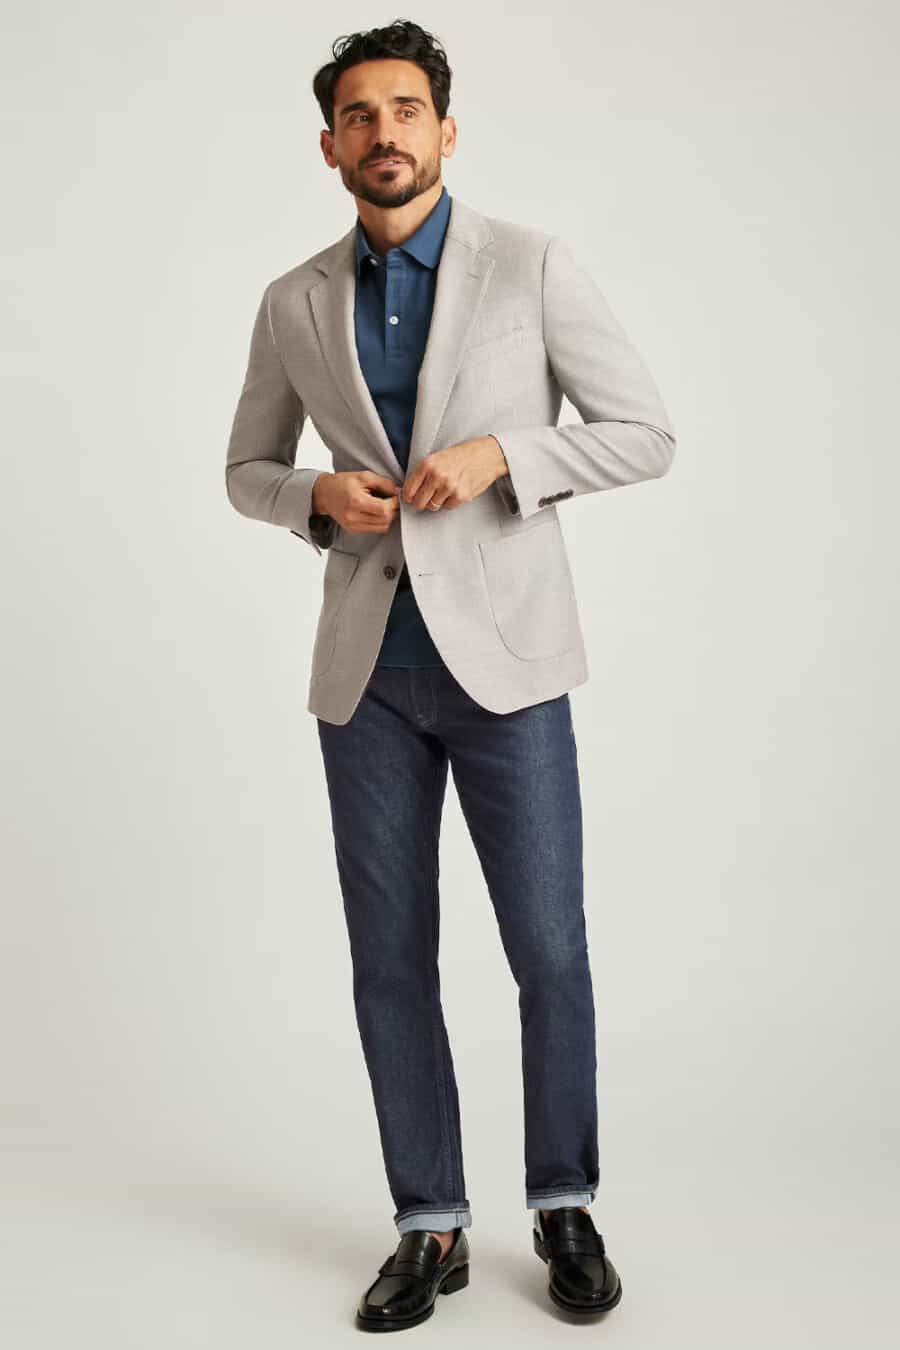 Men's raw denim jeans, mid blue polo shirt, stone blazer and black leather penny loafers business casual outfit